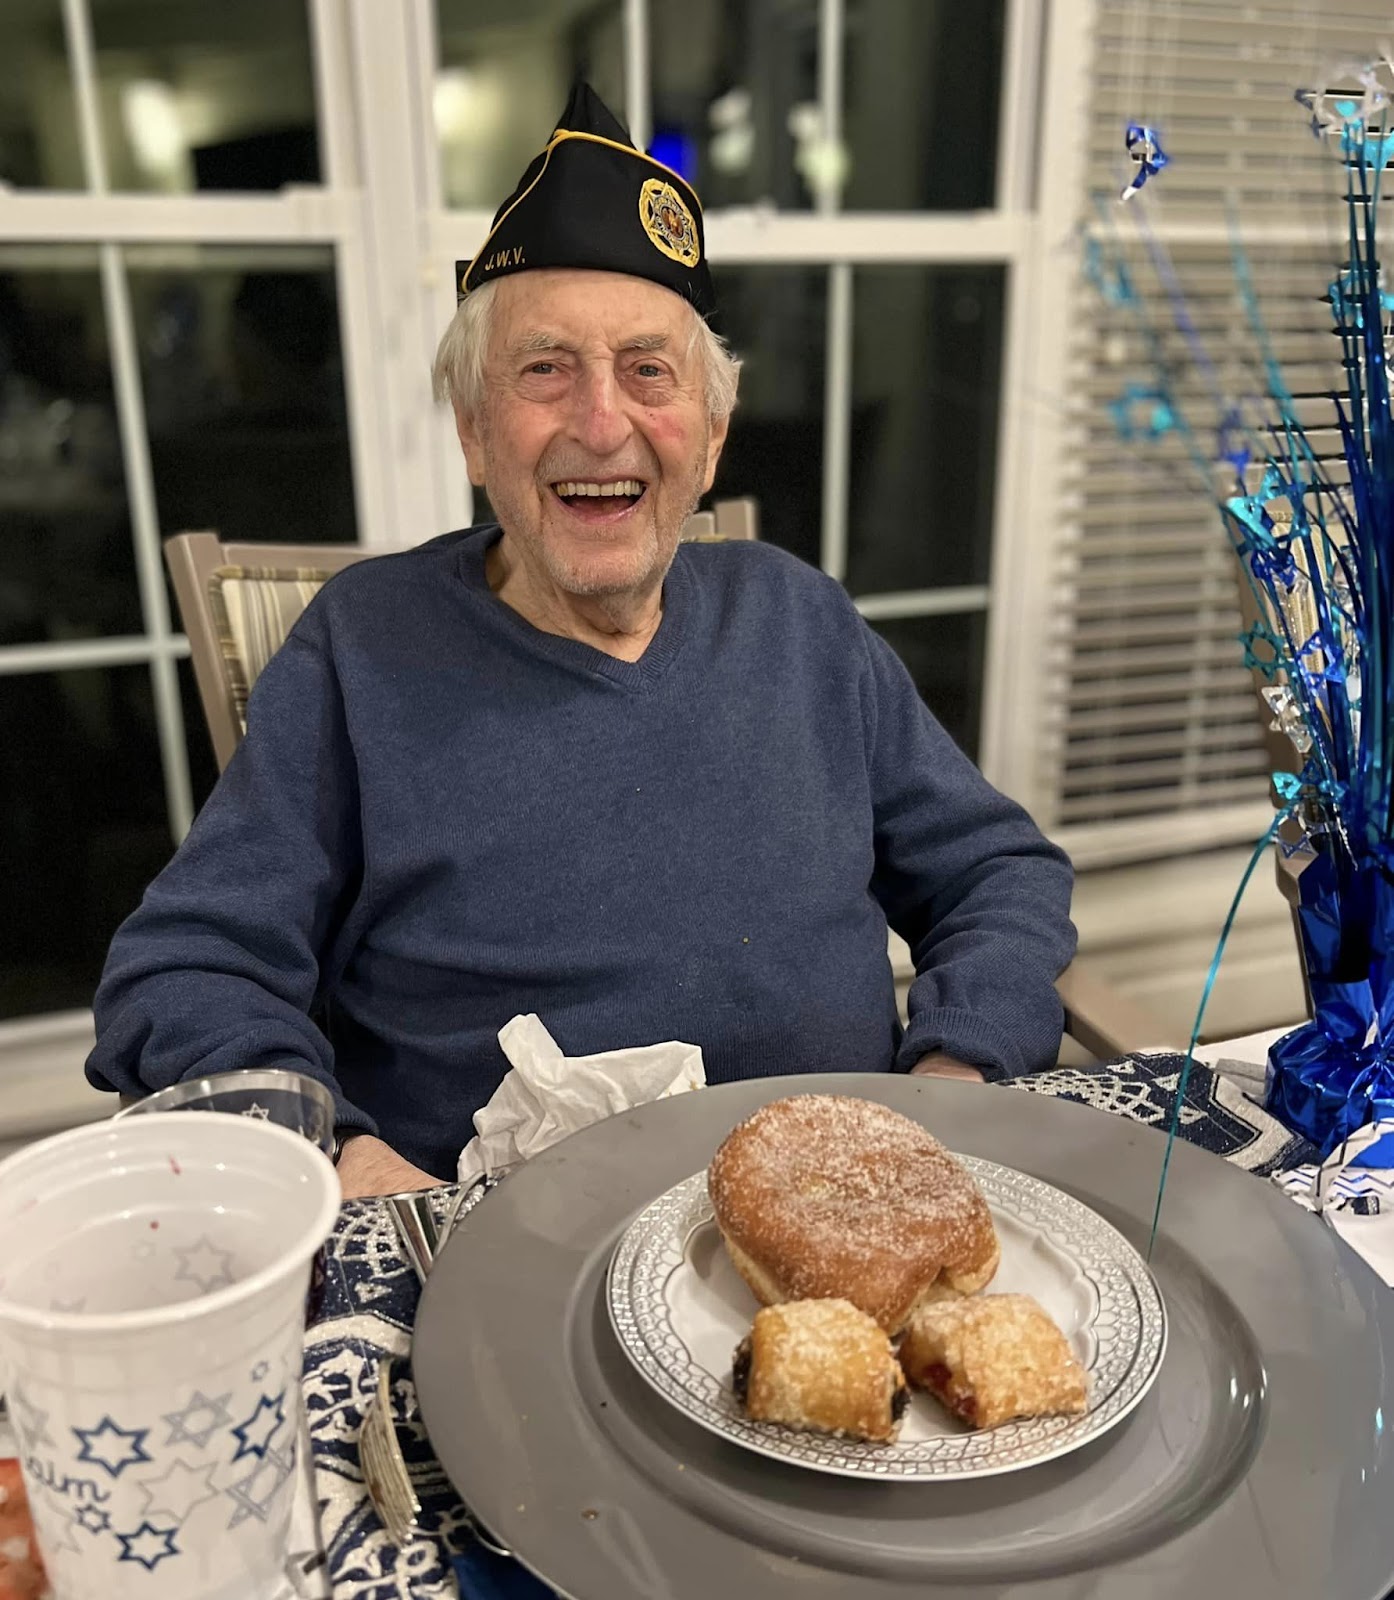 A senior smiling with a plate of sweets in front of him and receiving the 5 levels of care in assisted living